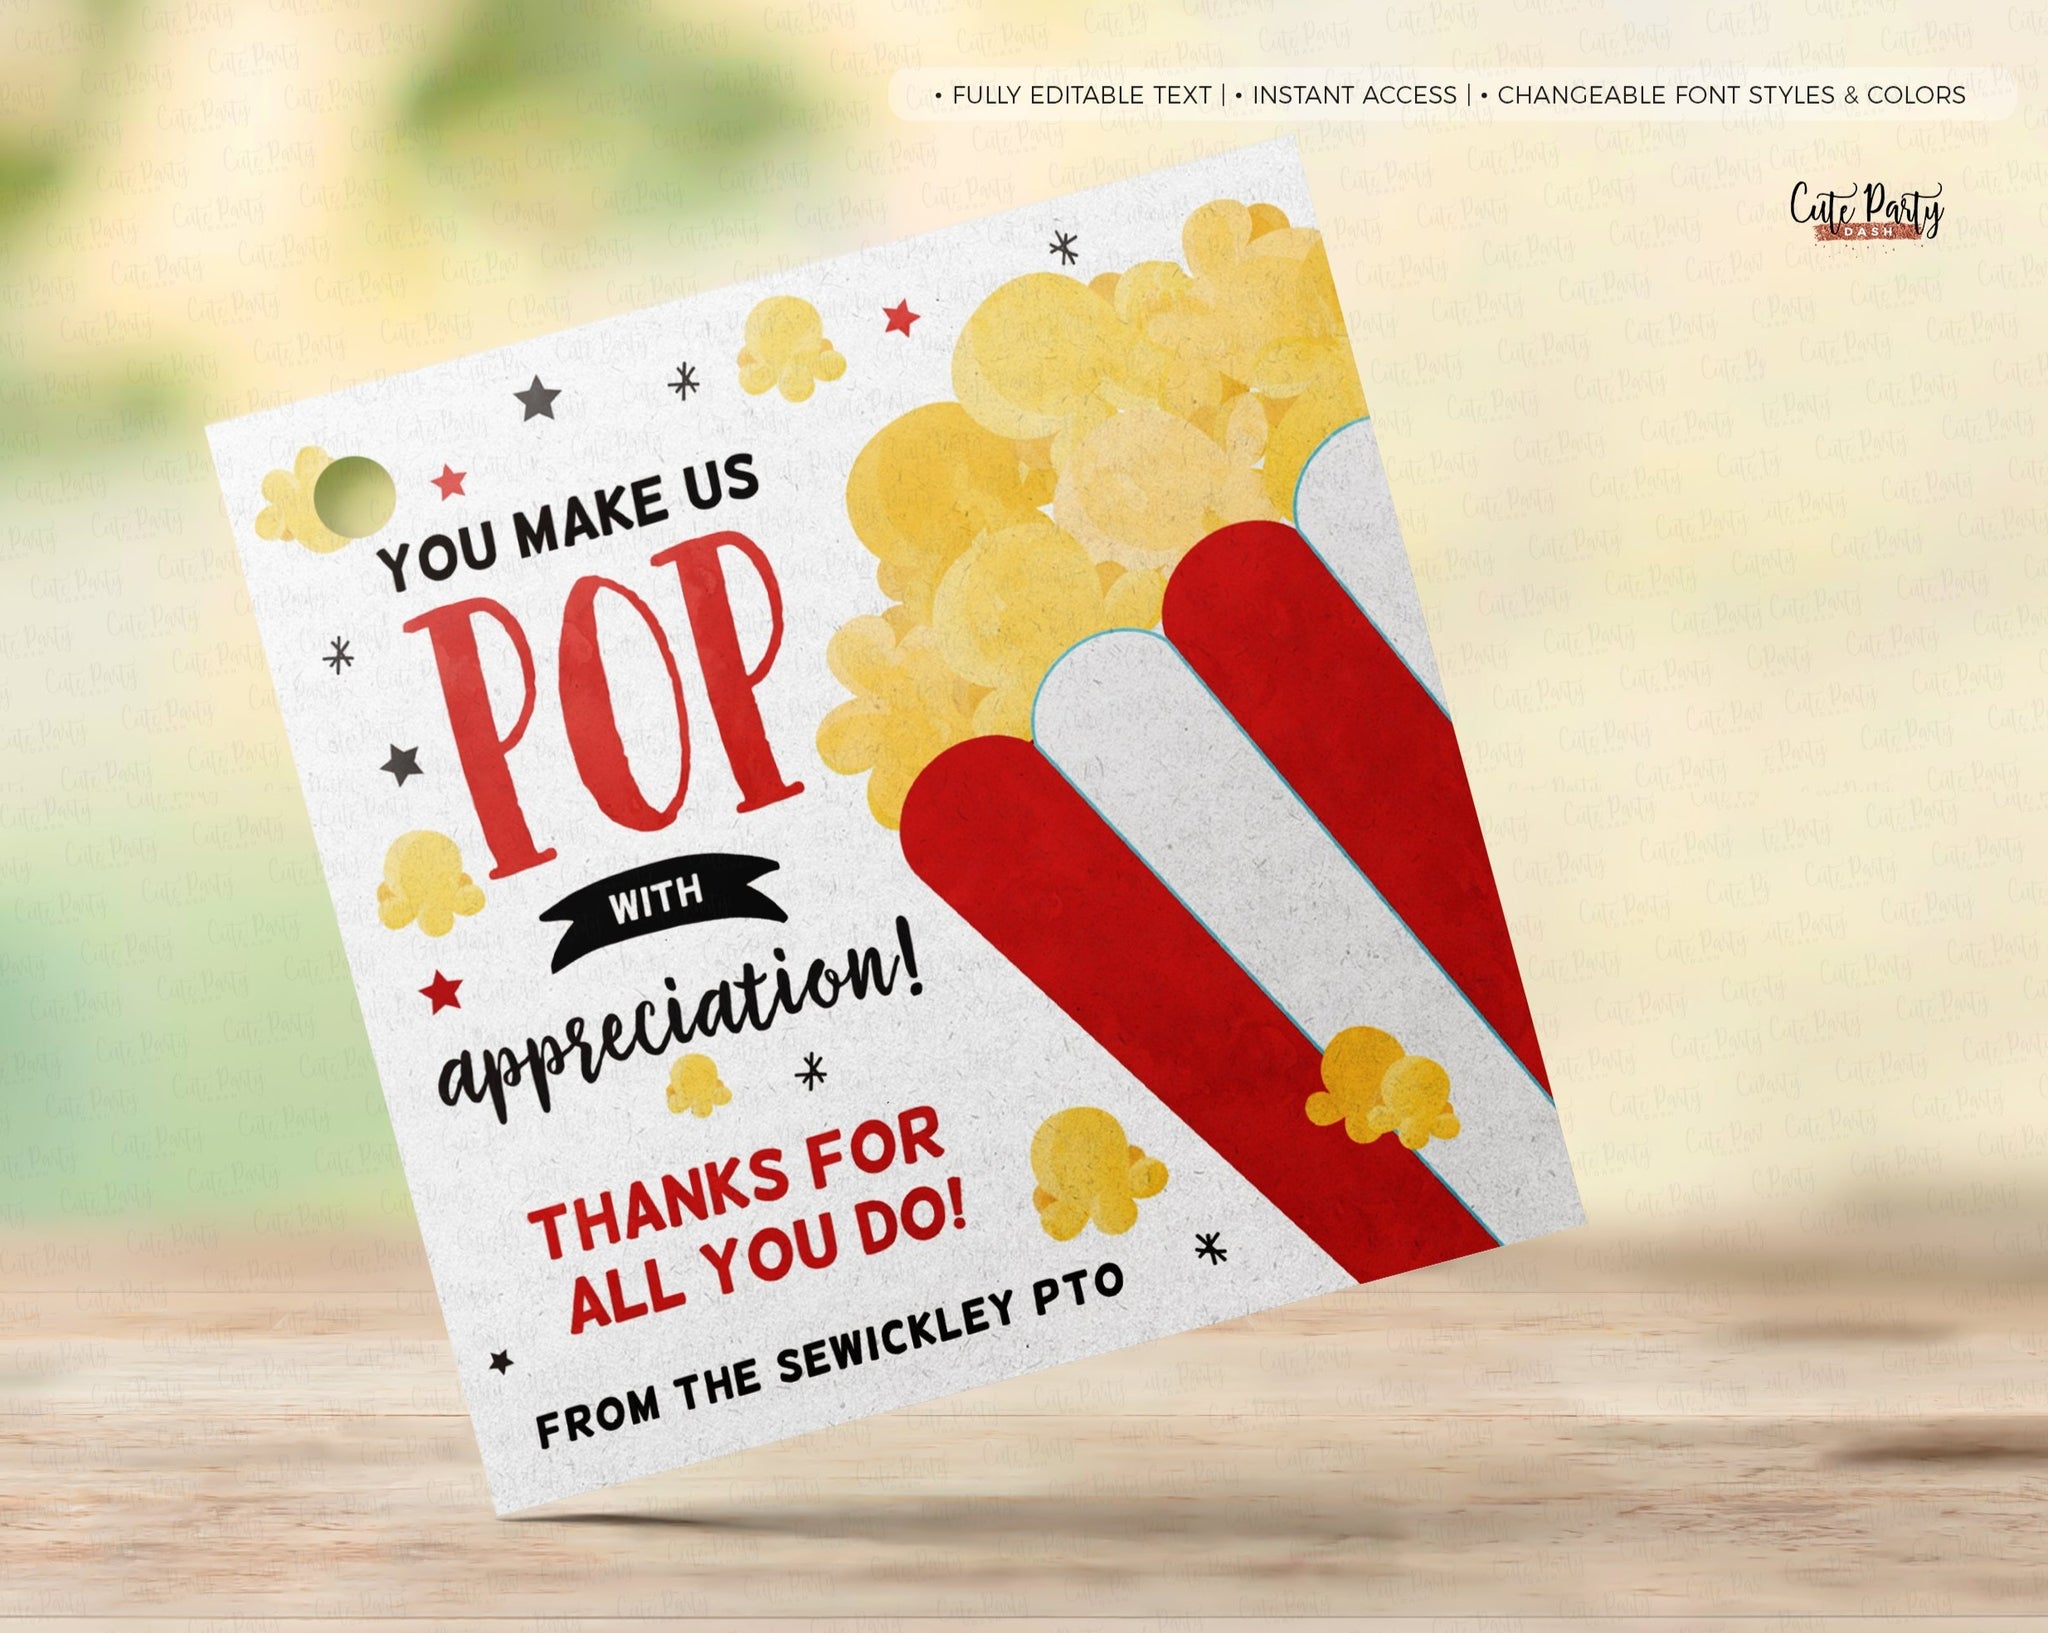 Realtor Popcorn Tag, Open House Real Estate Thank You Tag